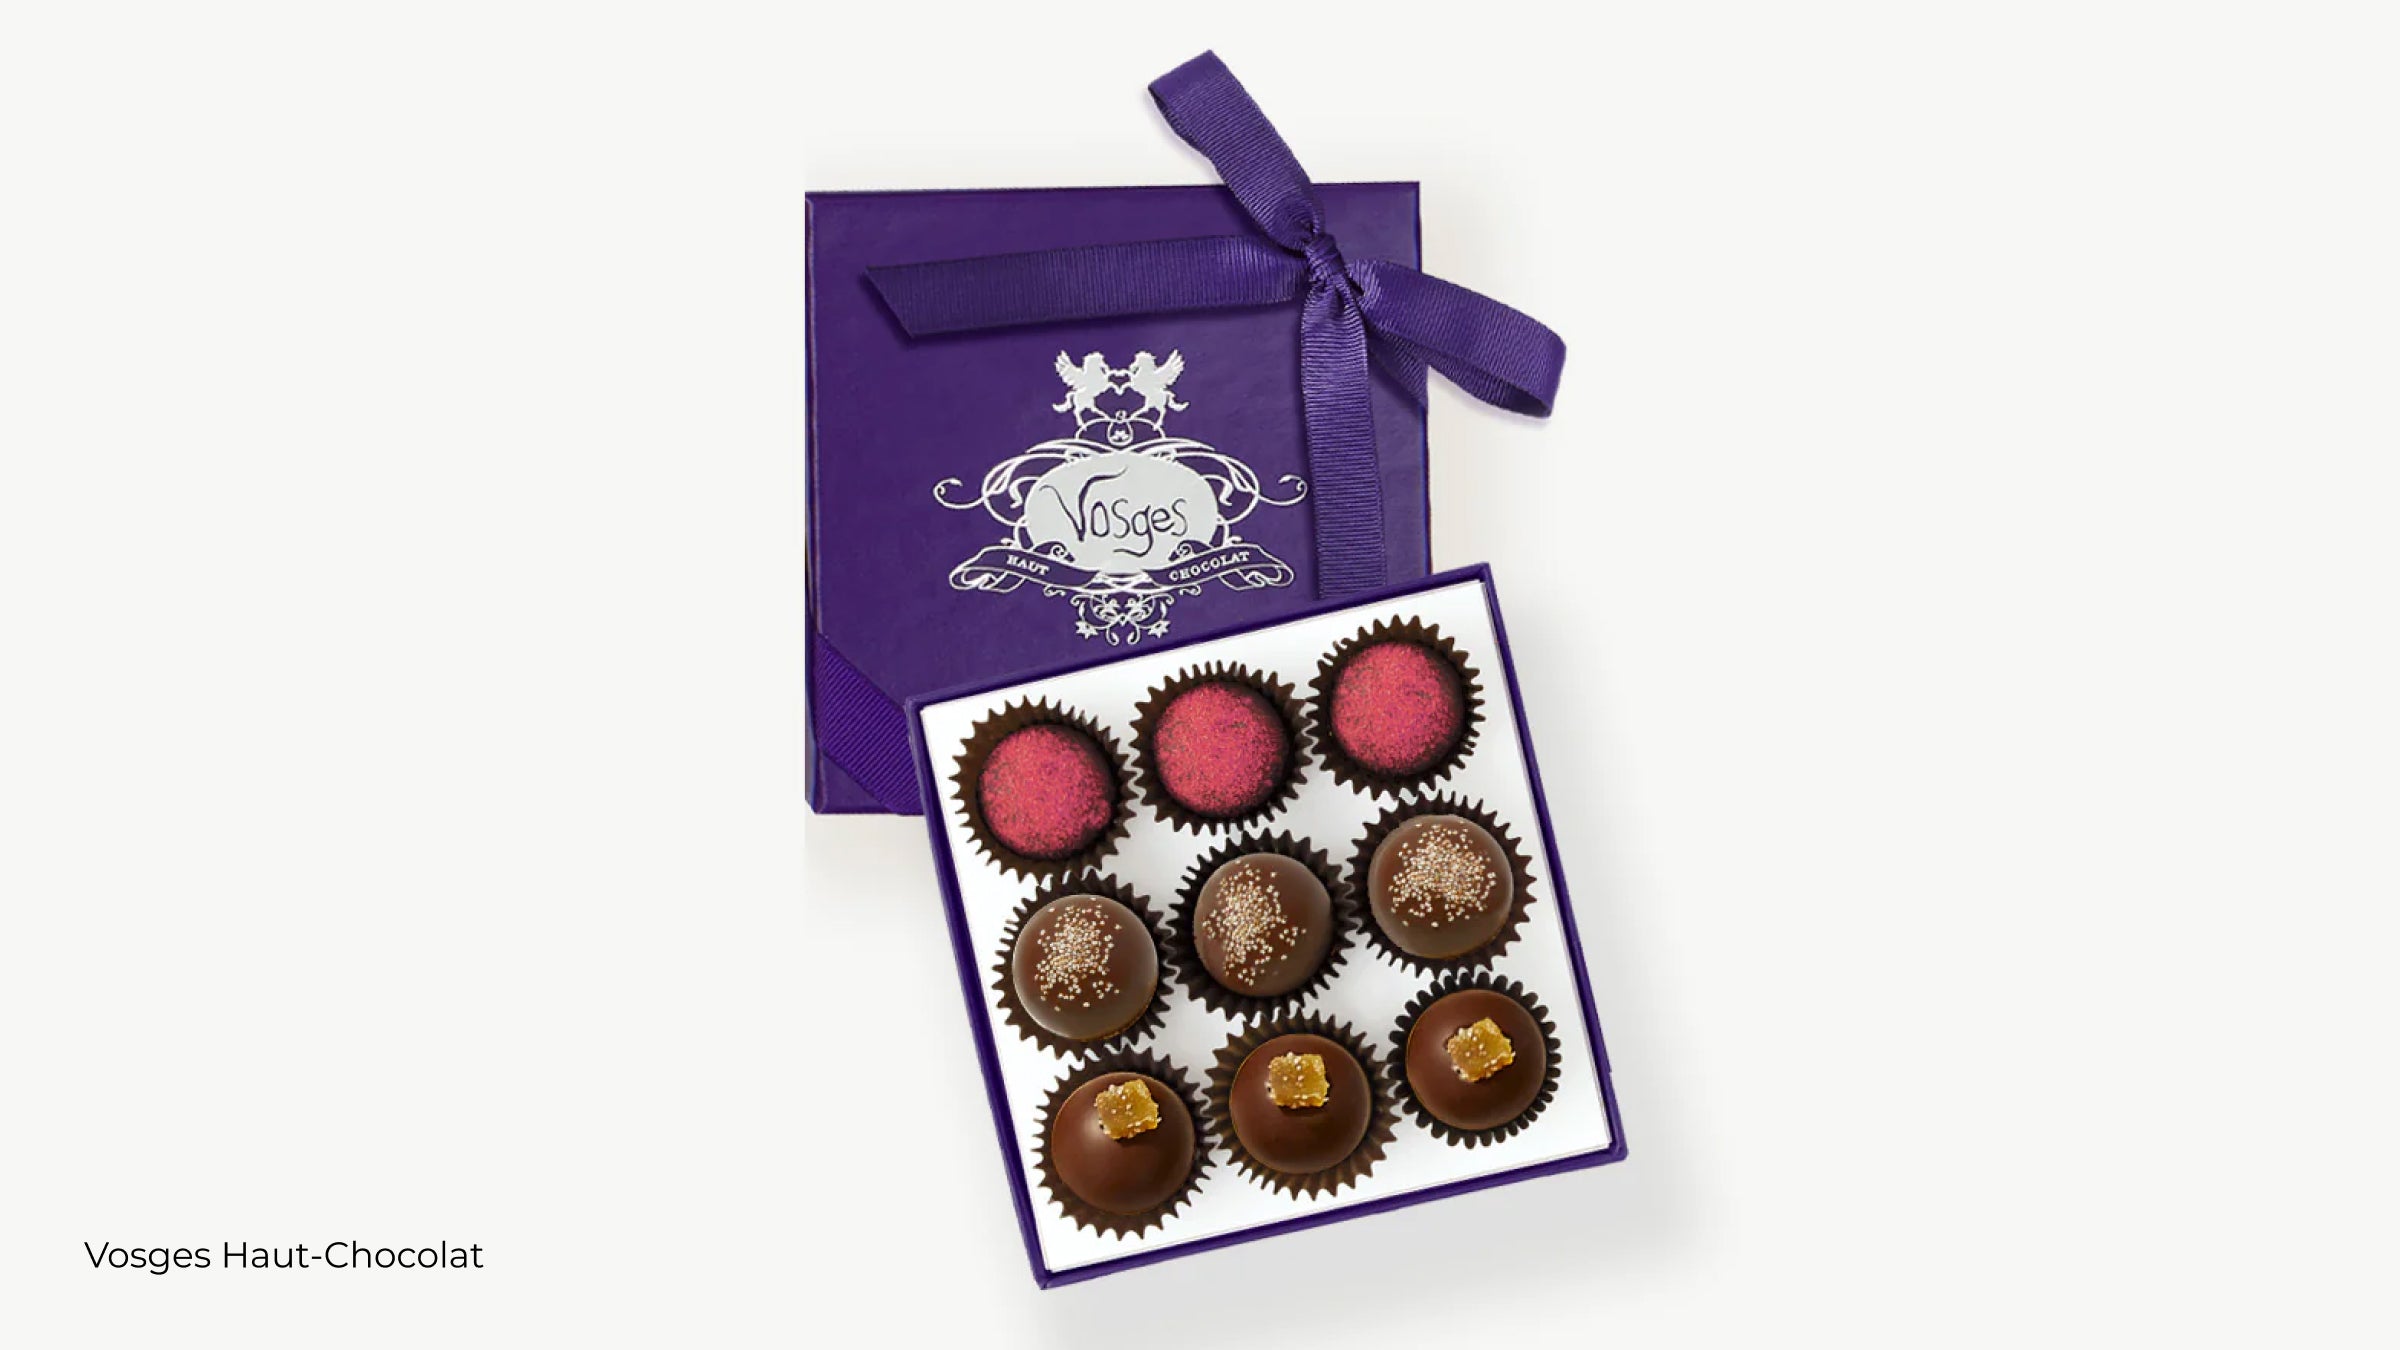 A purple box filled with nine vegan chocolate truffles from Vosges Haut-Chocolat